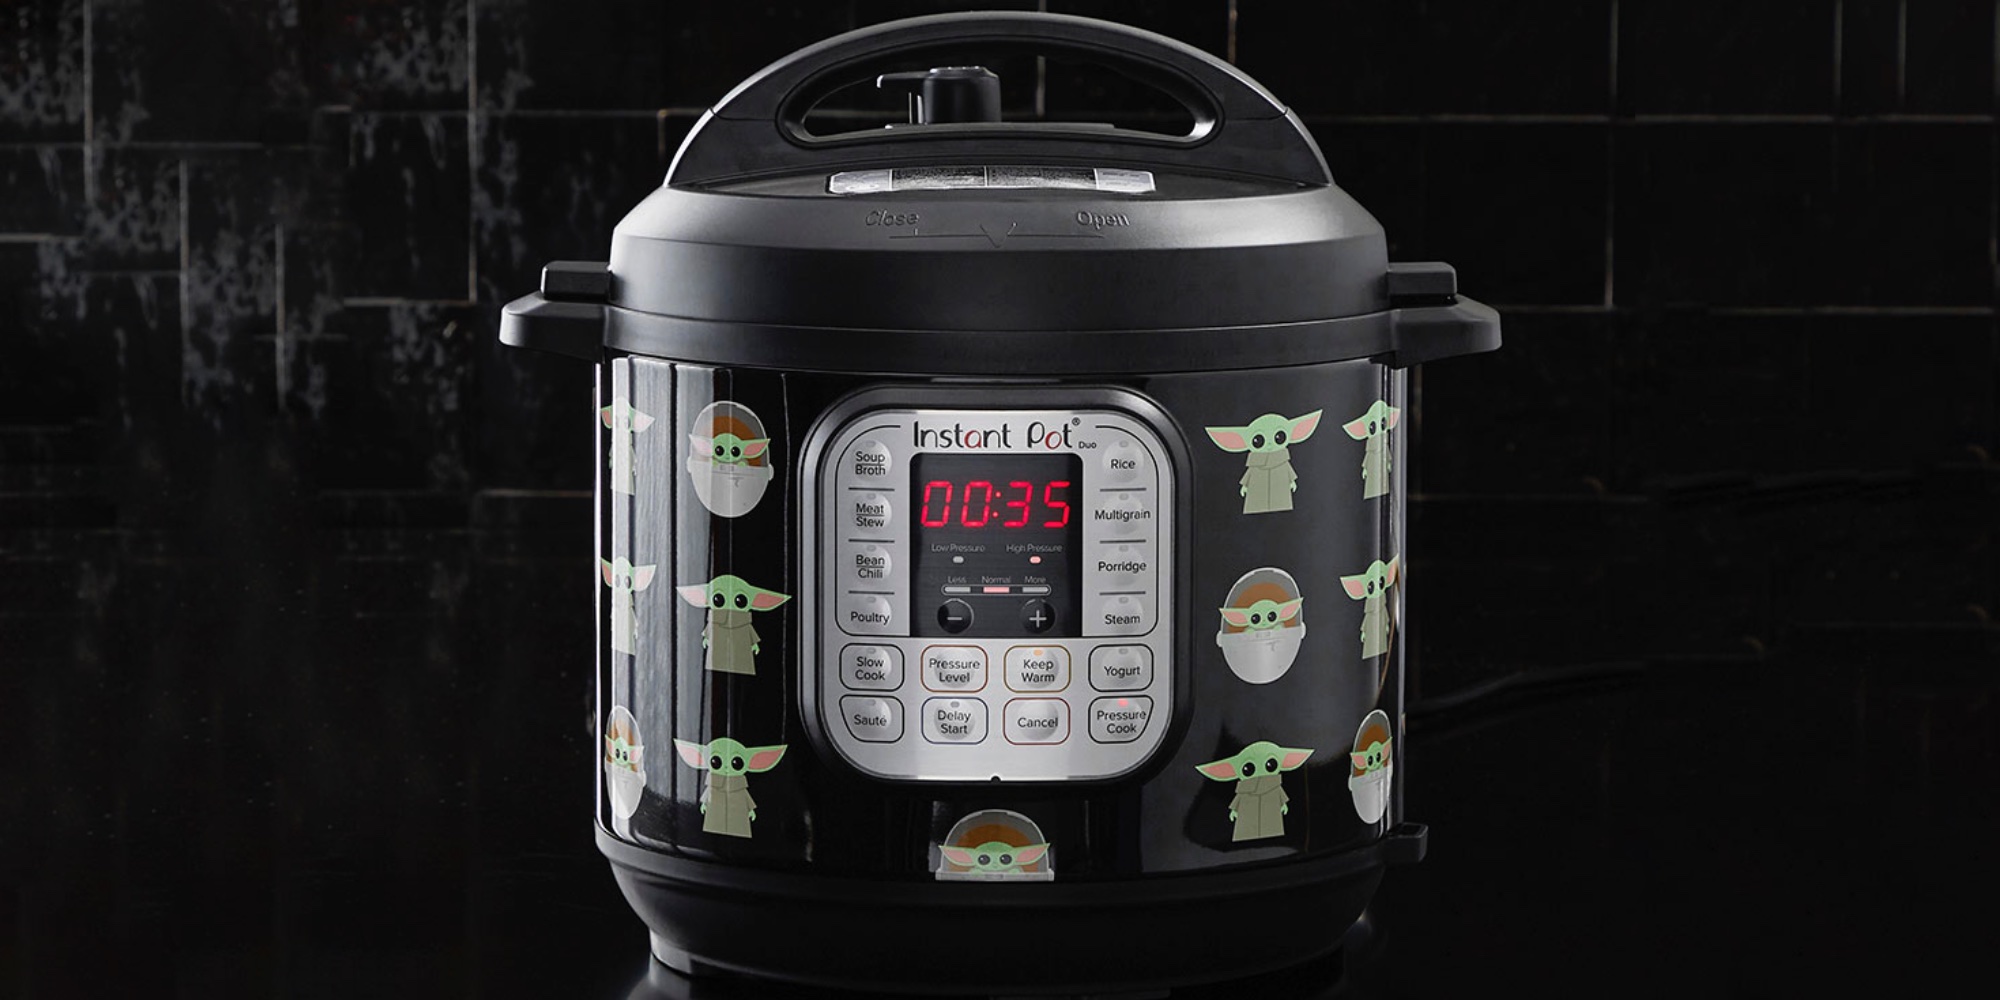 Instant Pot - May the Fourth be with you. Harness the power of the Force  with this special edition Instant Pot. #instantpot #starwars  #maythefourthbewithyou #starwarsday #themandalorian #grogu #babyyoda  Available at